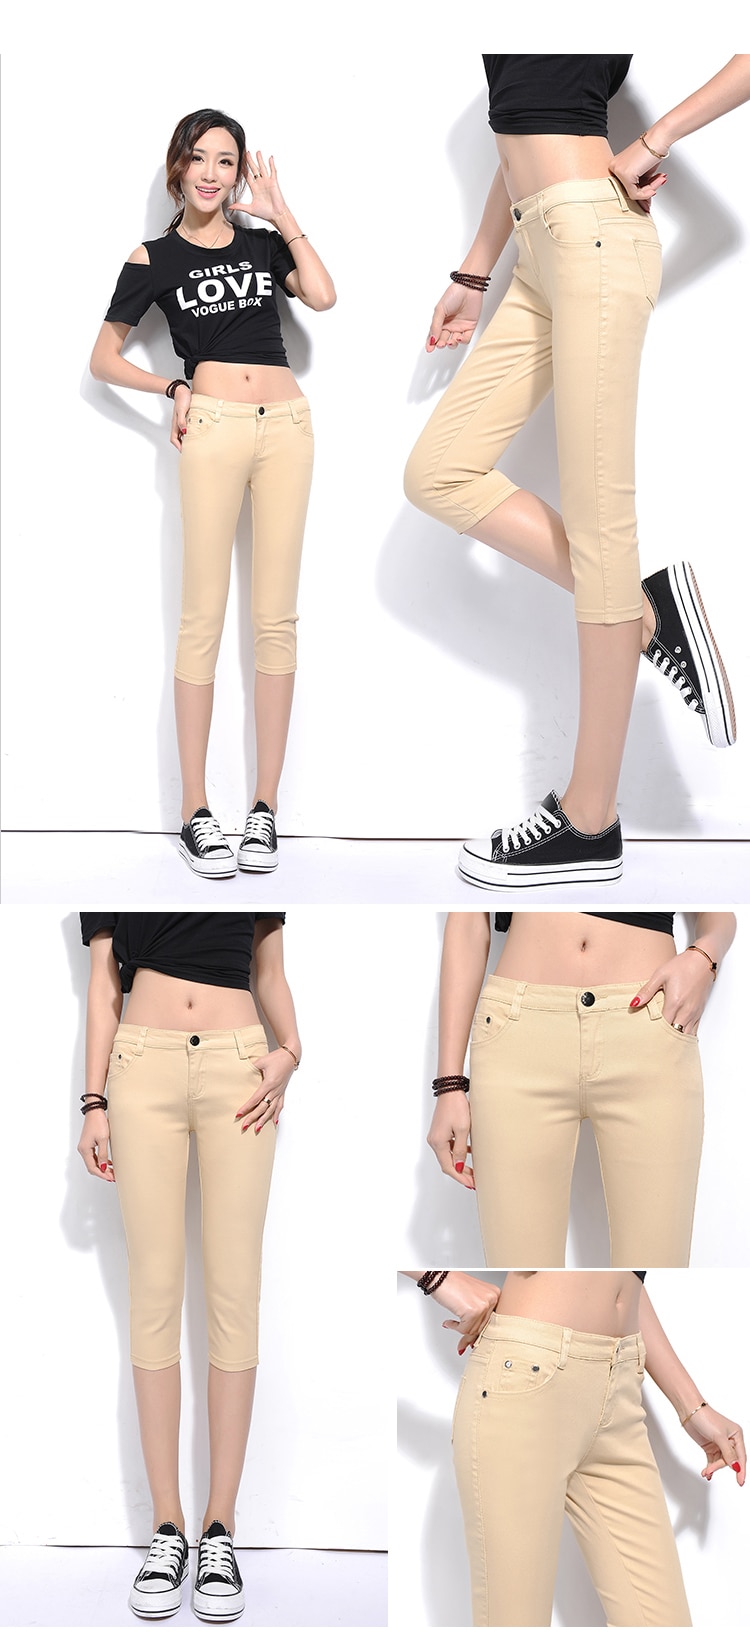 2018 New Spring Leisure Stretch Candy Color Cropped pants Female pencil pants Thin section Trousers Female feet Breeches (19)